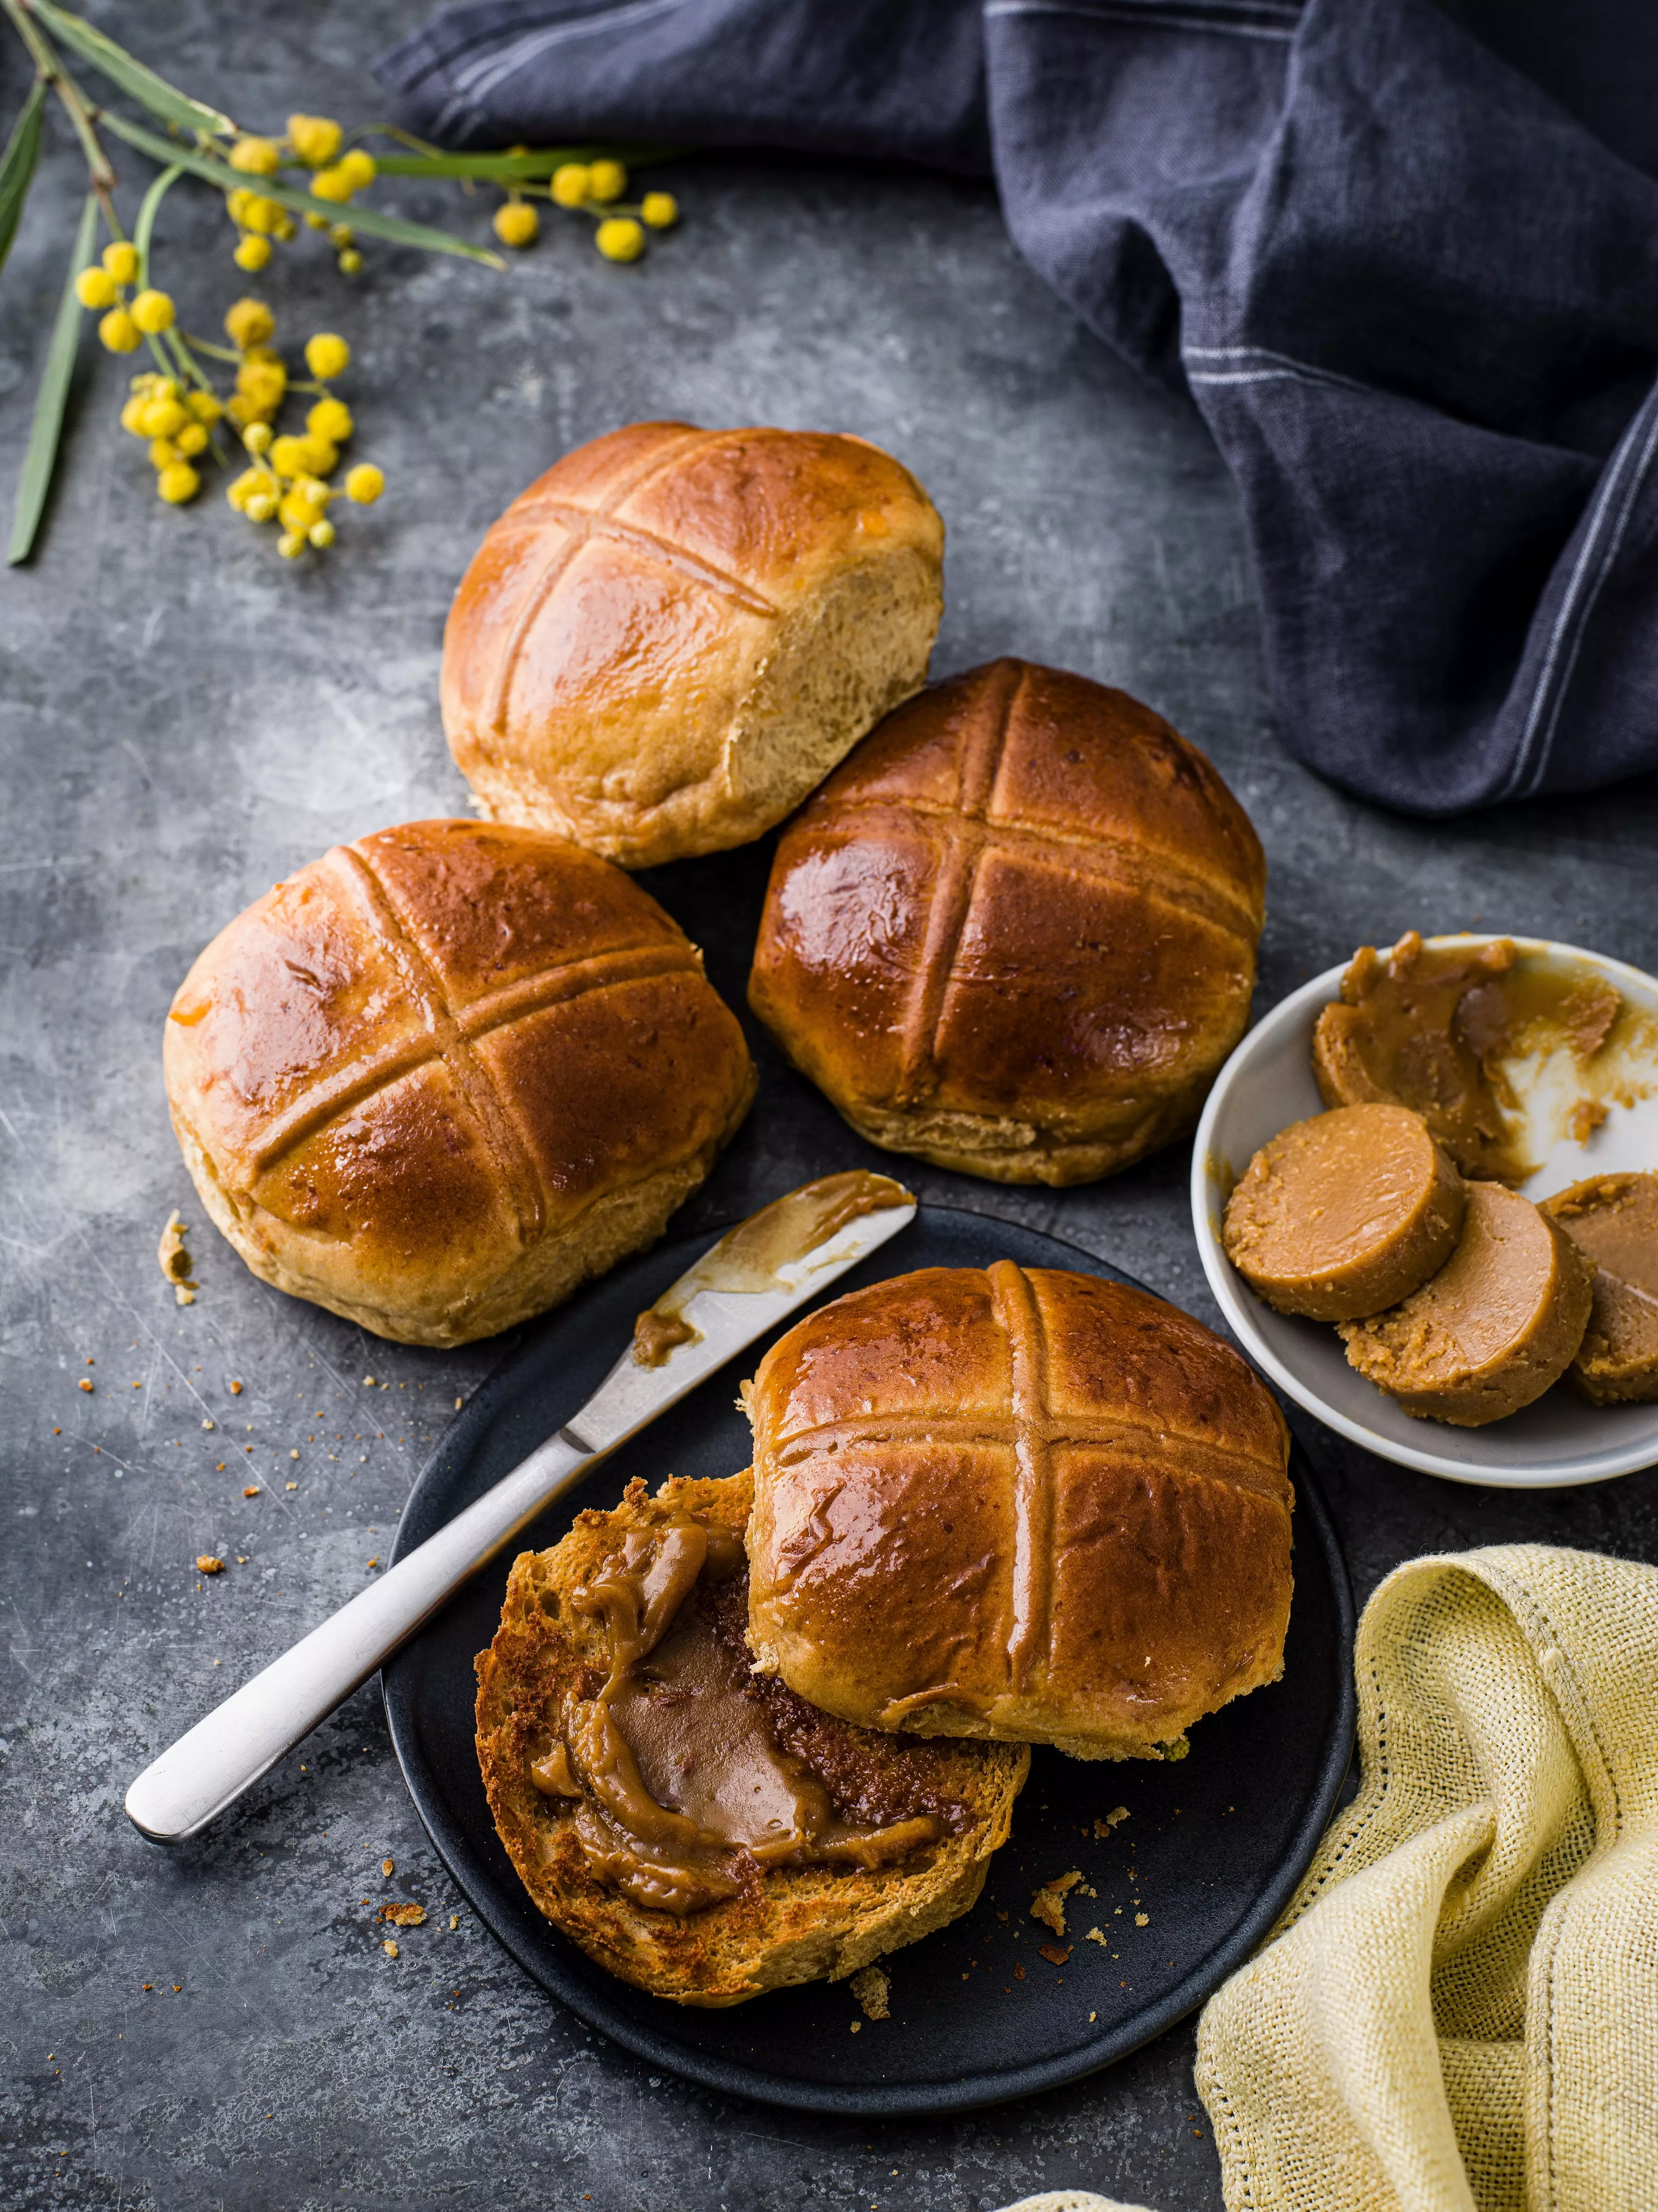 The Marmite hot cross buns are the company's latest collaboration with M&S (